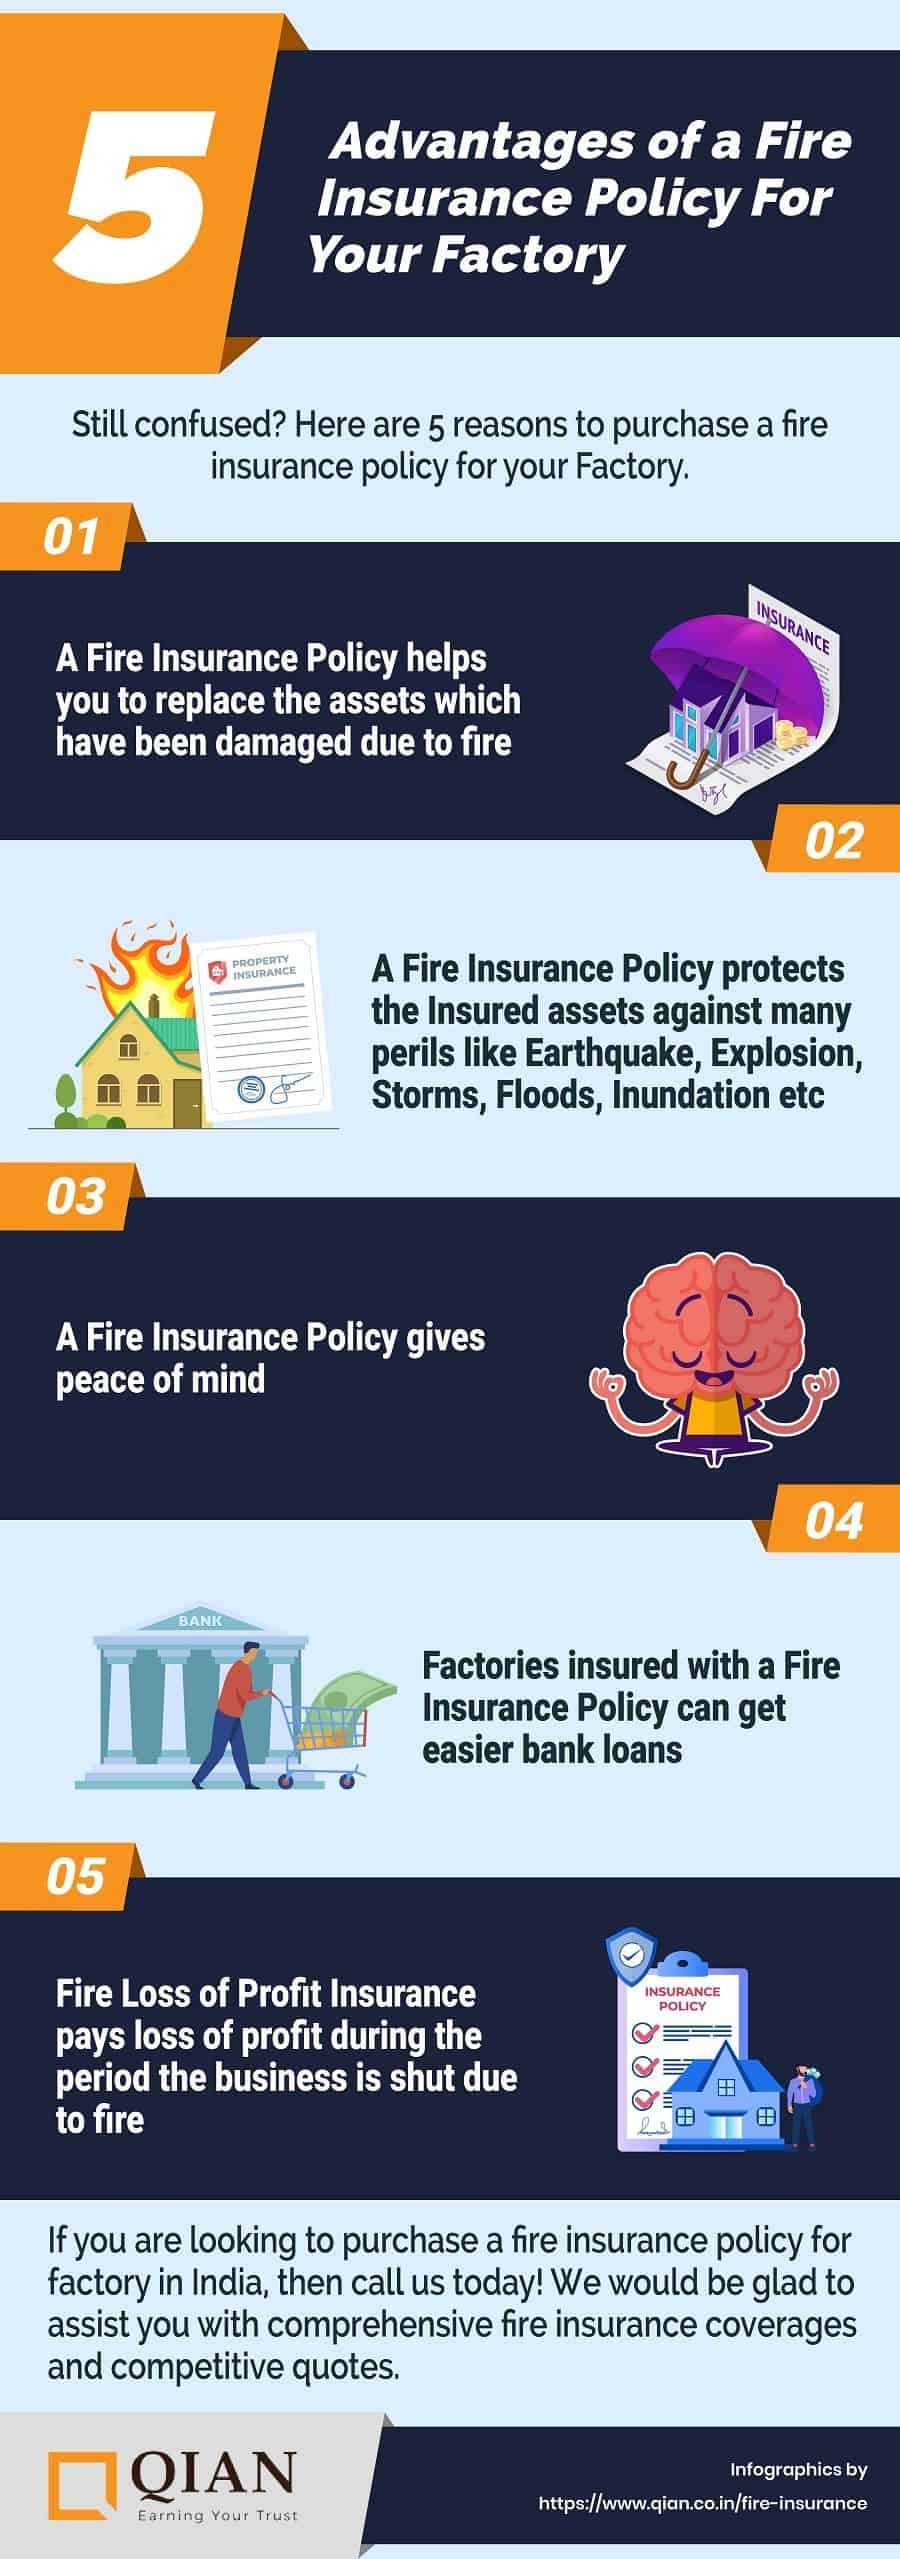 Fire Insurance Policy For Your Factory